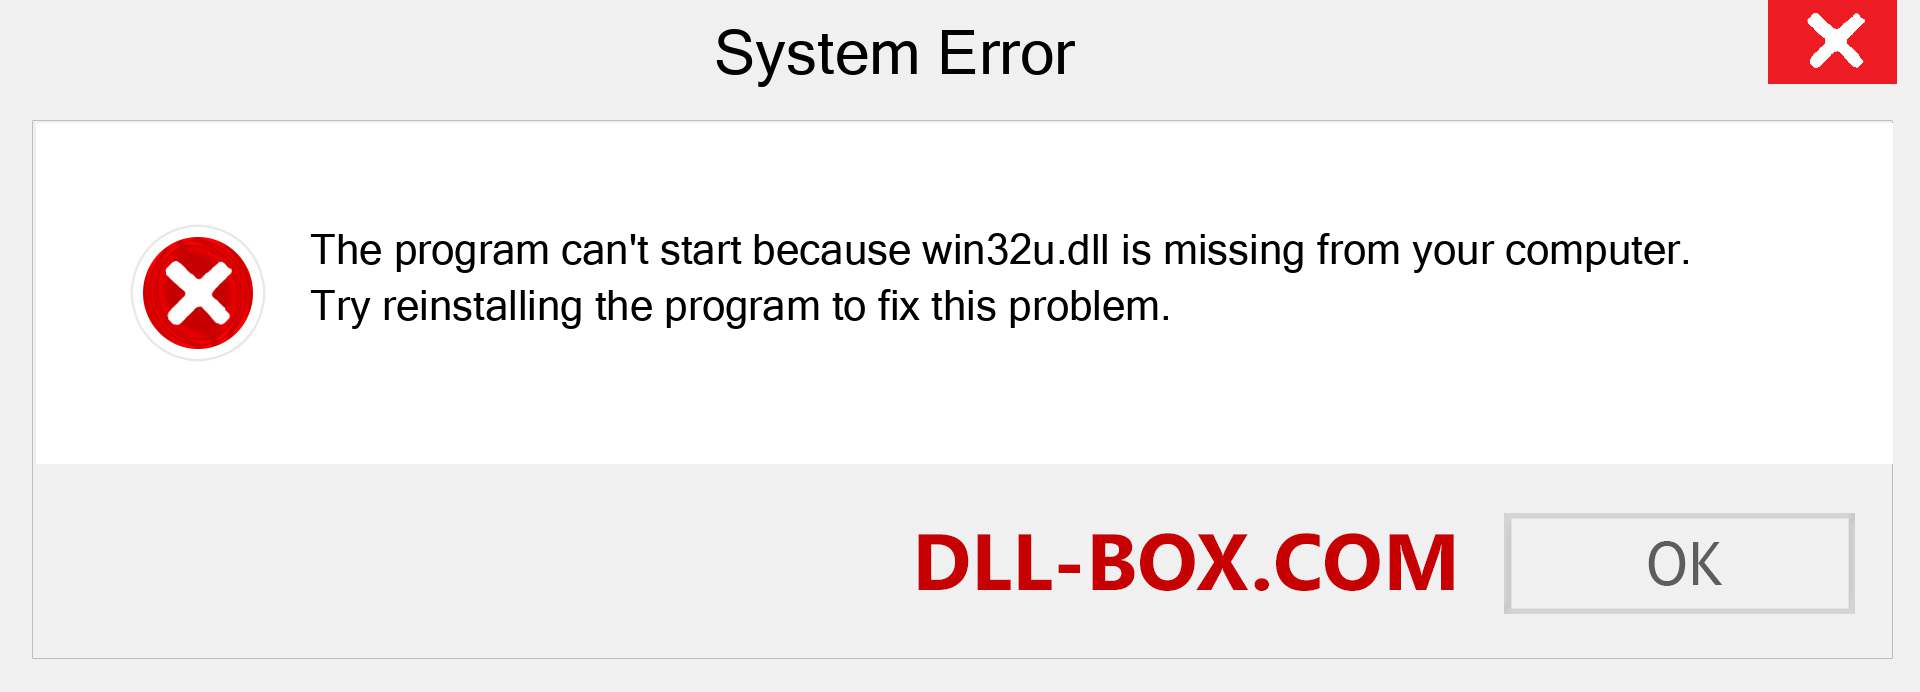  win32u.dll file is missing?. Download for Windows 7, 8, 10 - Fix  win32u dll Missing Error on Windows, photos, images